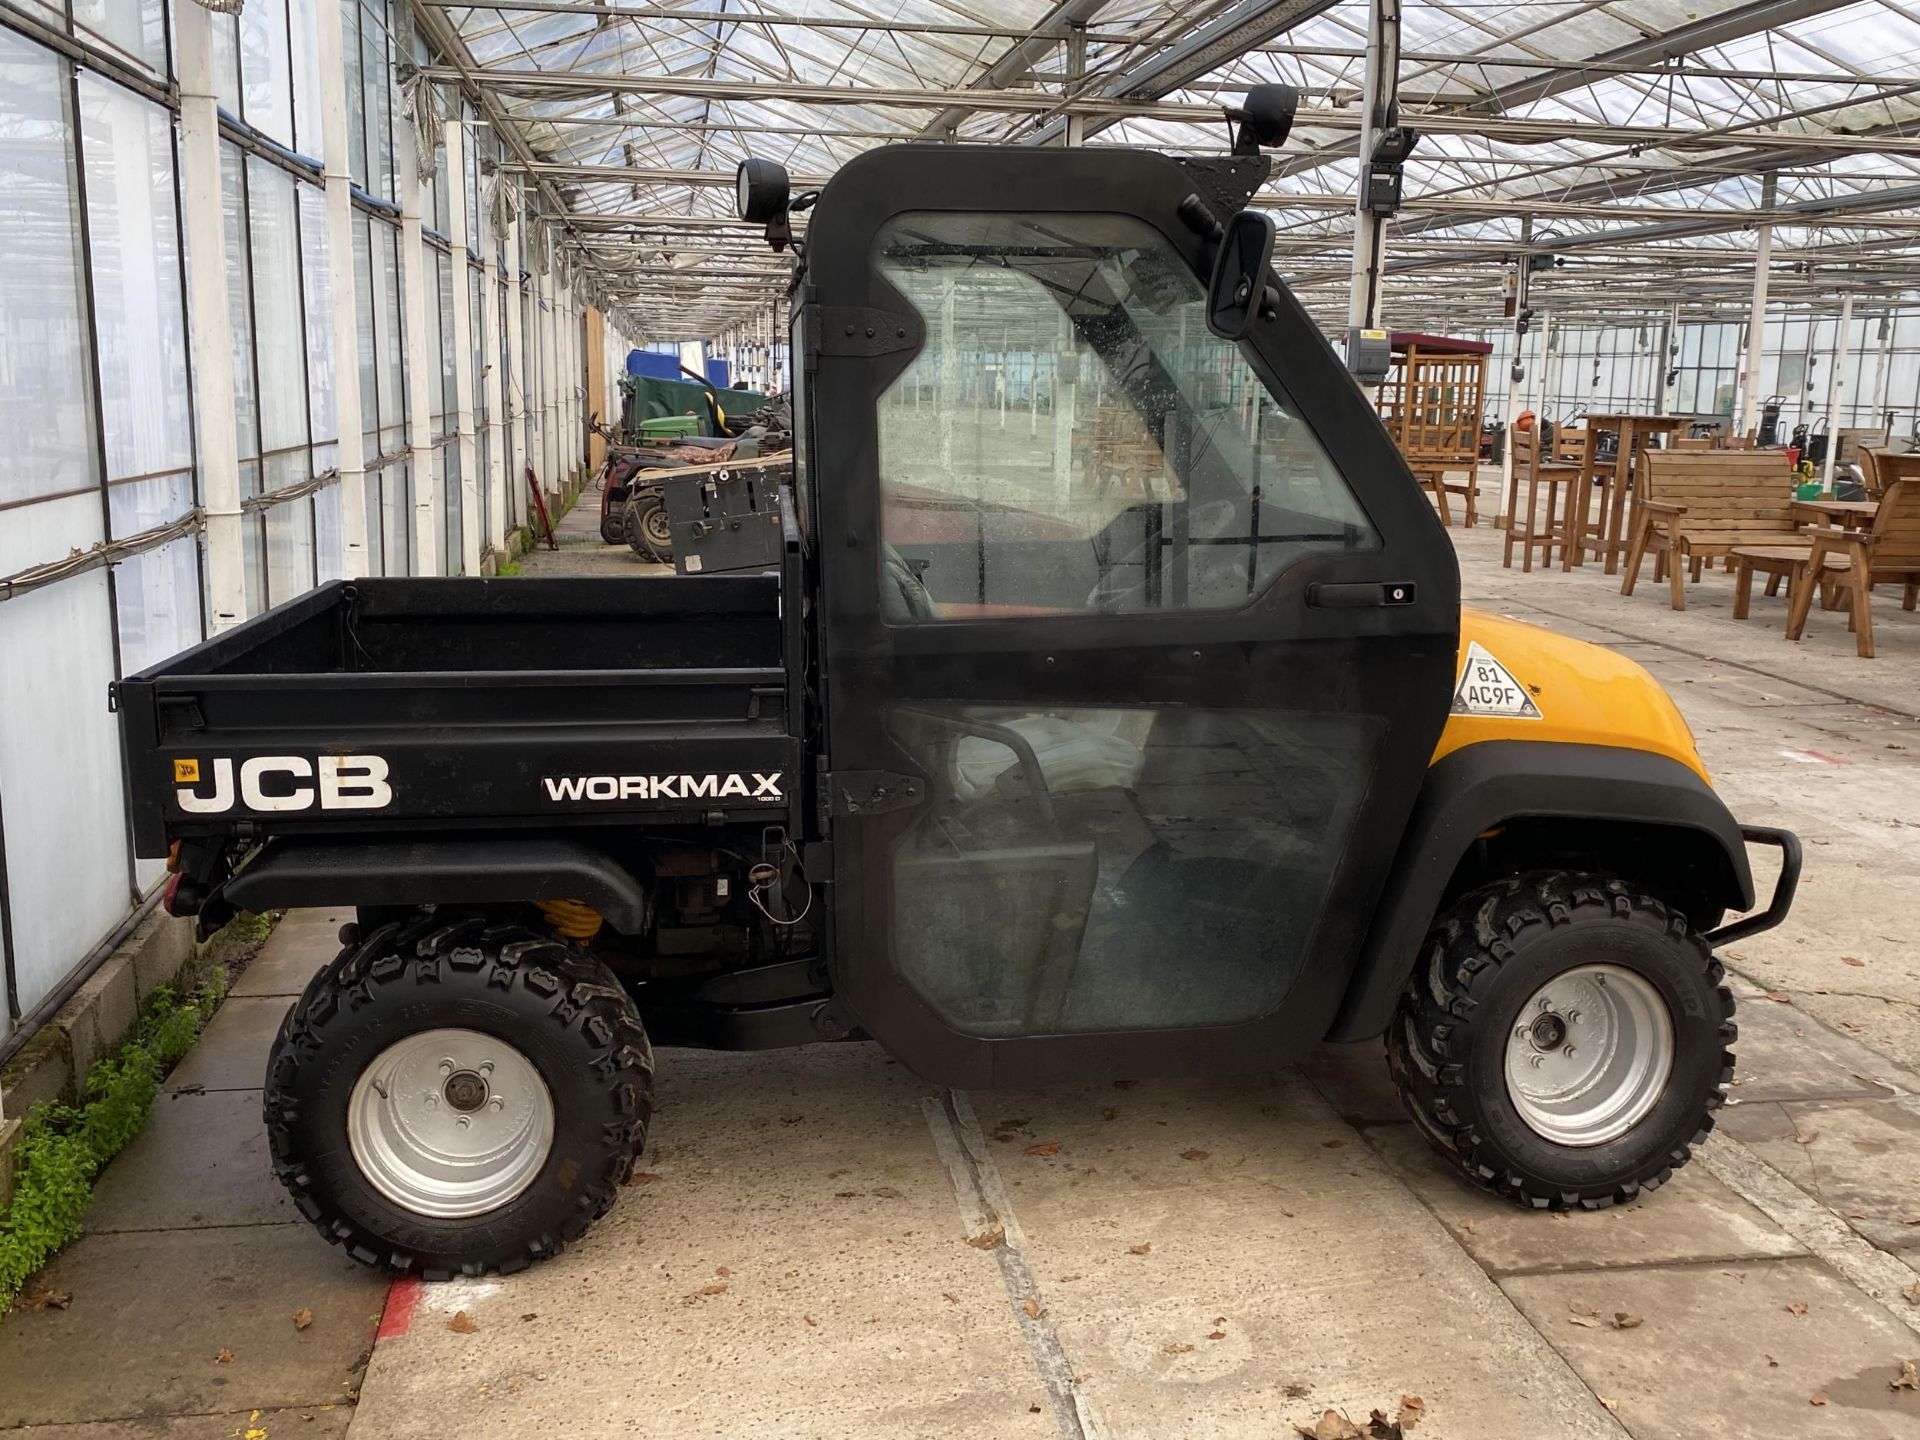 2011 JCB WORKMAX 1000D DIESEL CX11EYY OWN OWNER FROM NEW 2 NEW REAR TYRES WITH V5 LOG BOOK NO VAT - Image 7 of 7